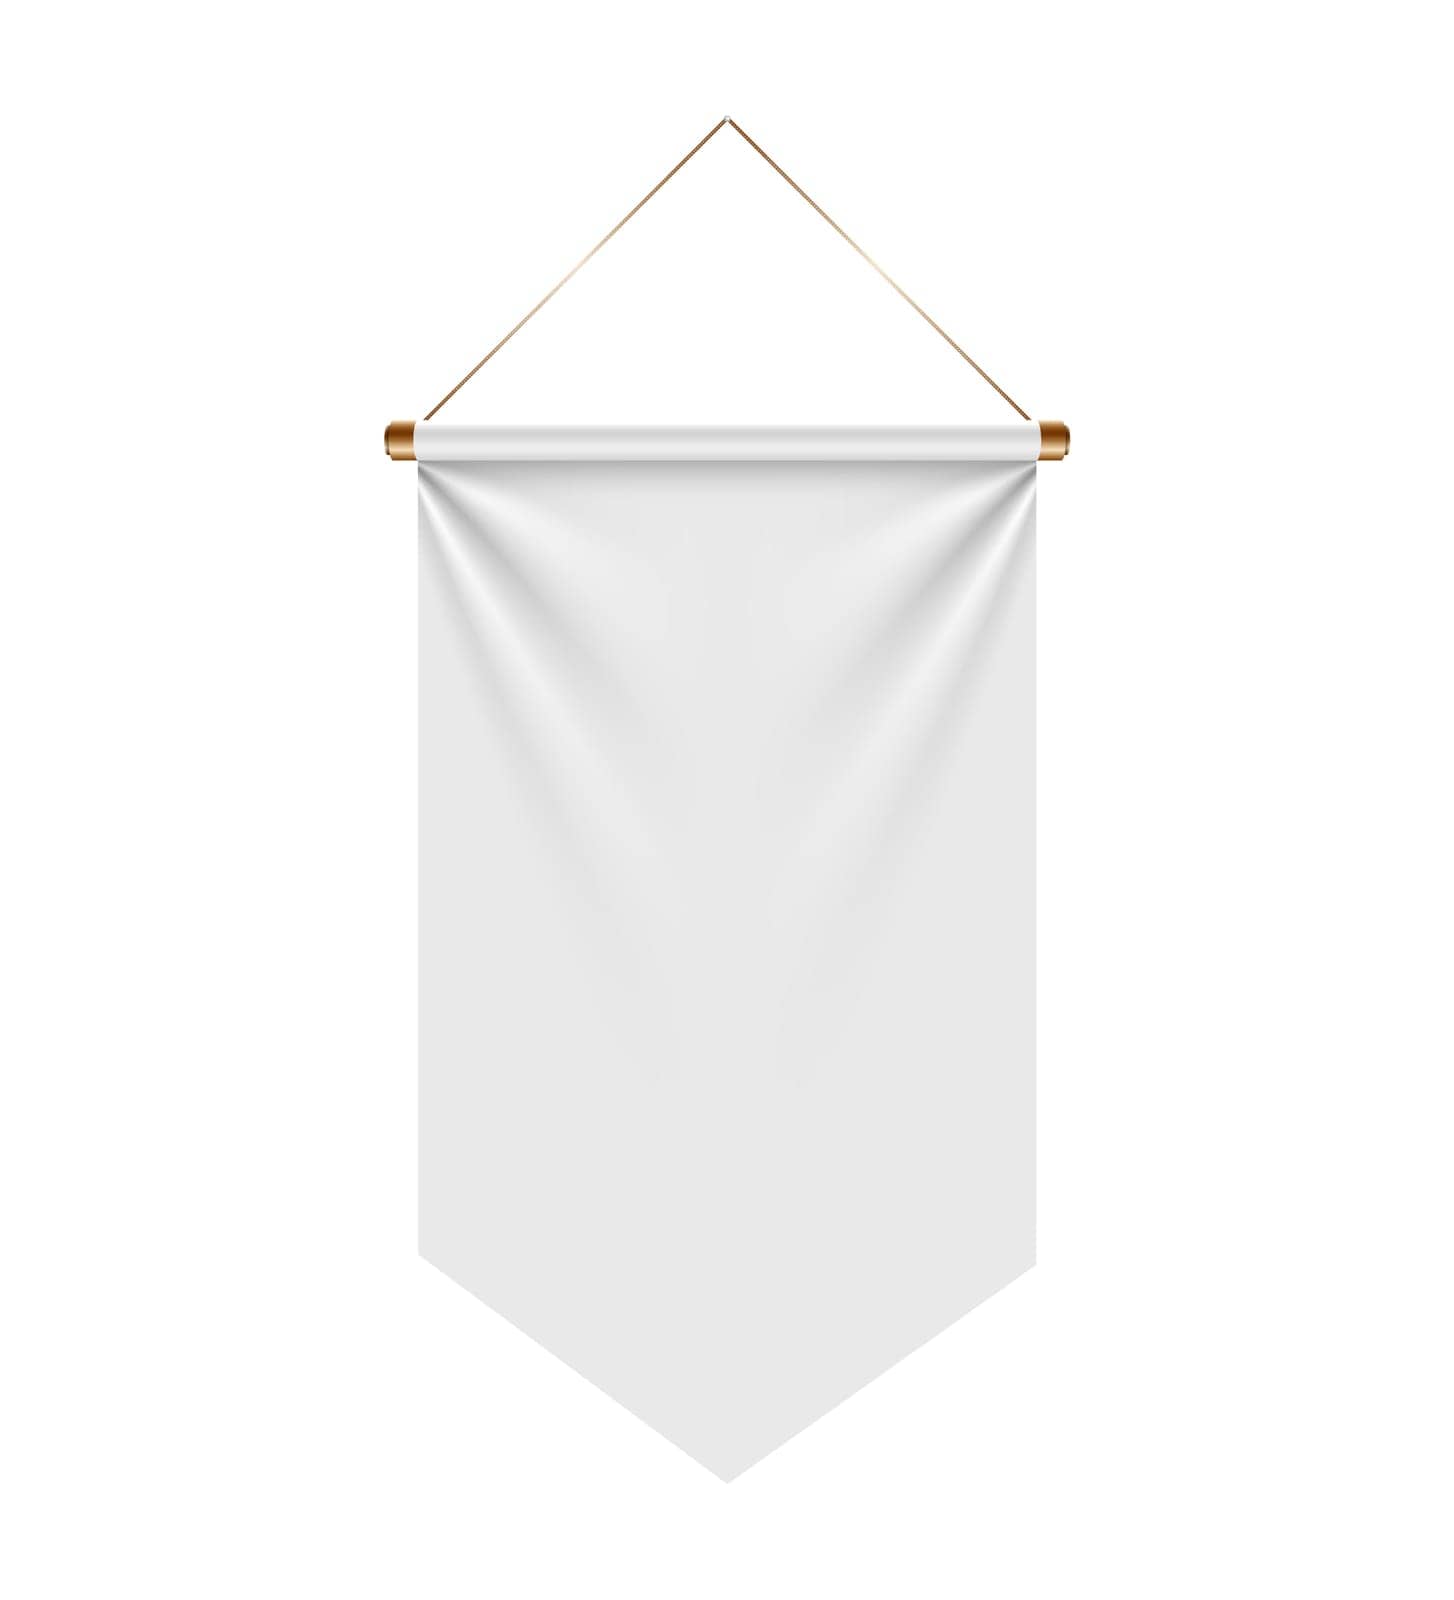 white banner made of metal hangs symmetrically from a rope on a white background. vector flah mock up